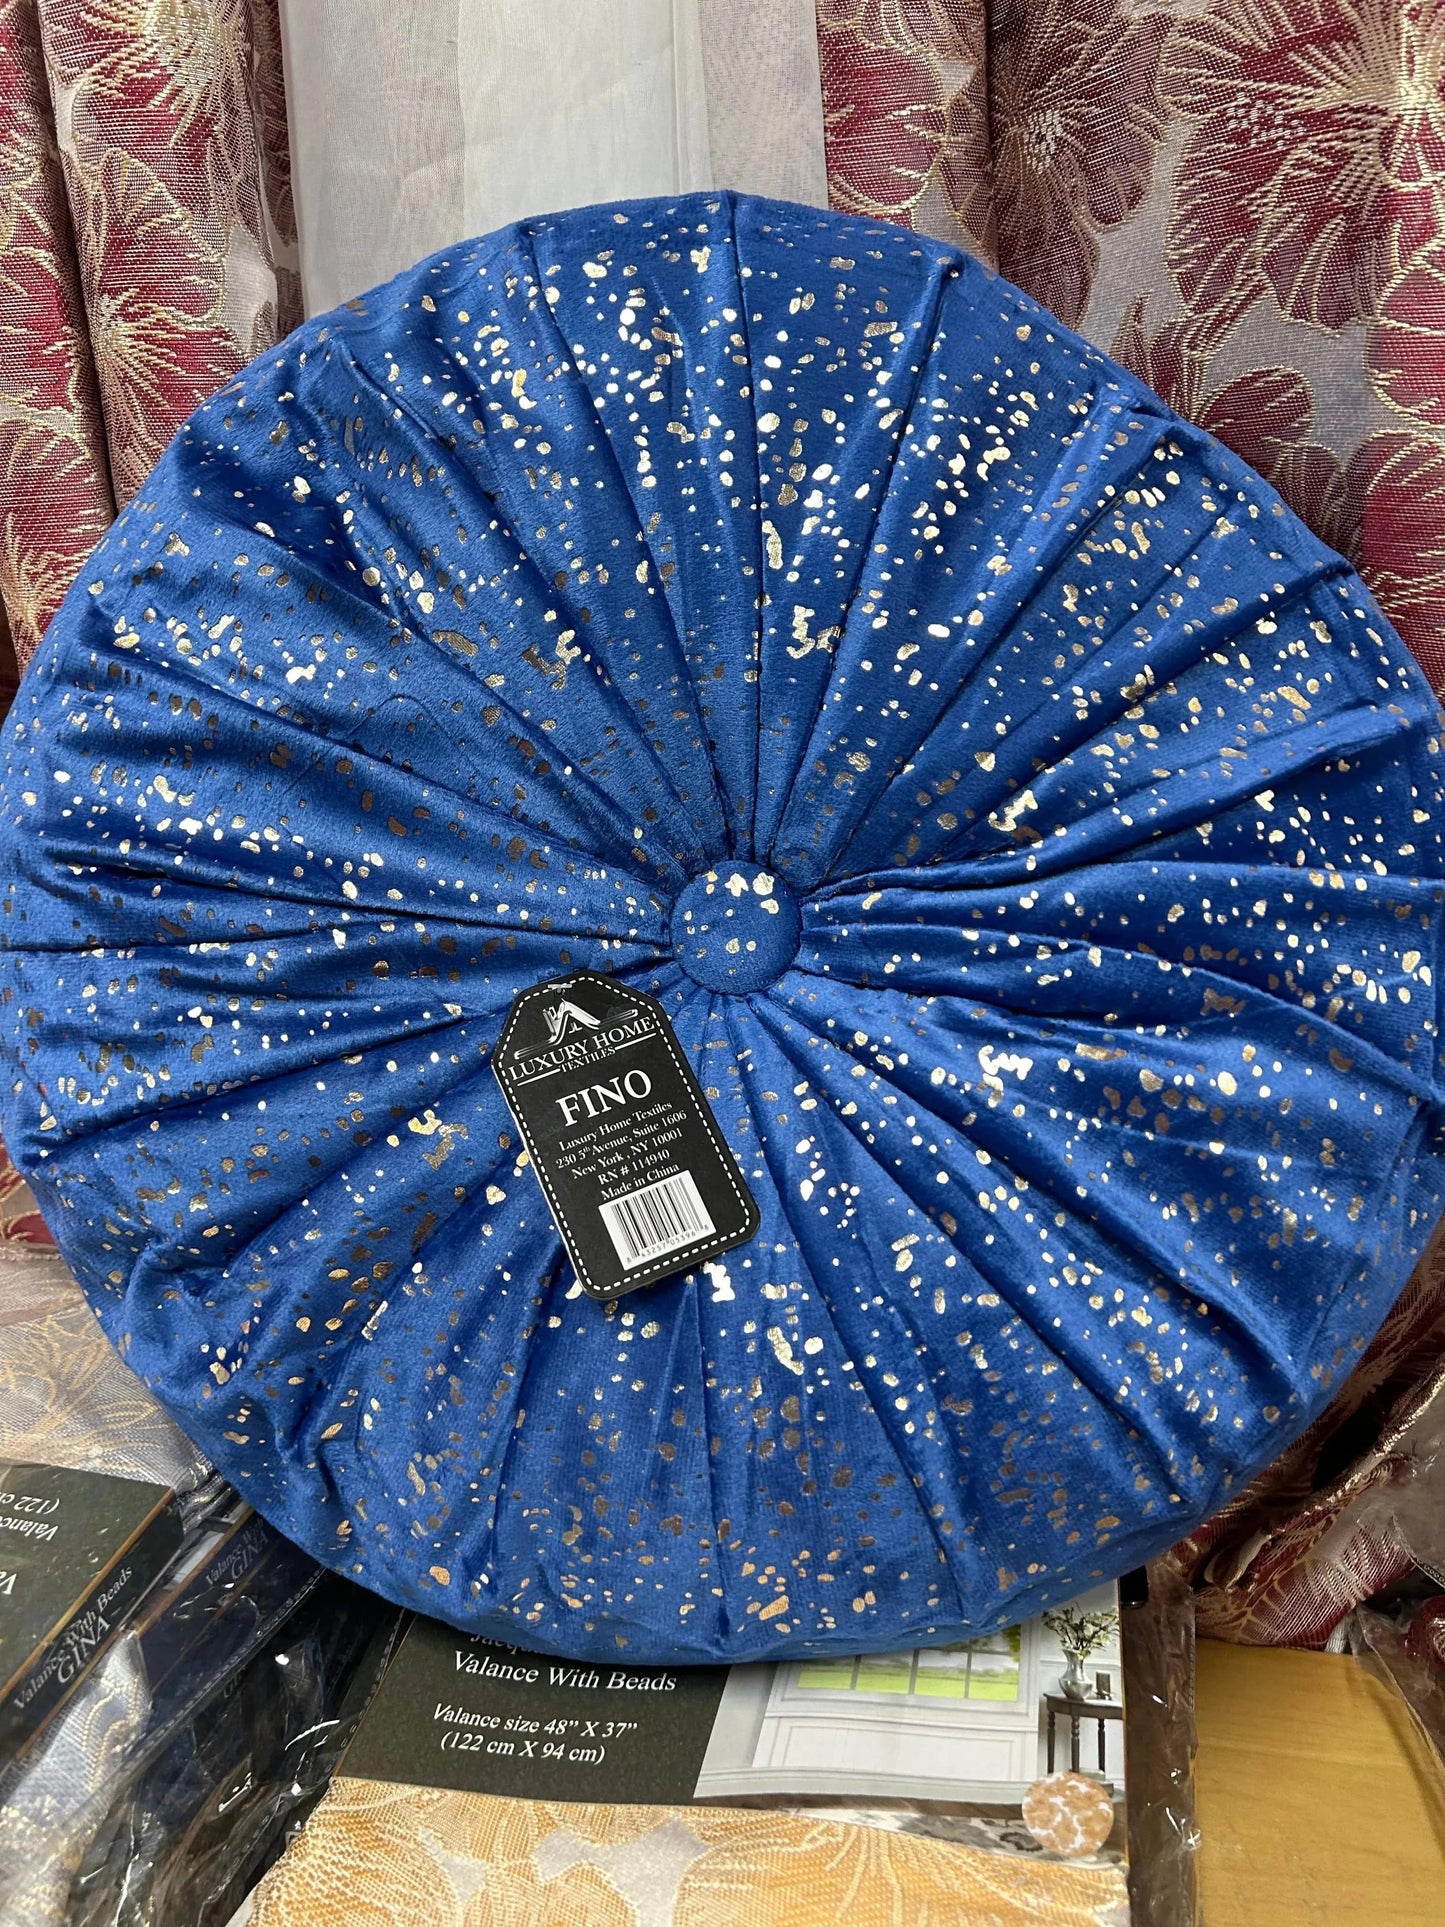 Linen World Royal Blue / Gold Speckled 16” Round Throw Pillow